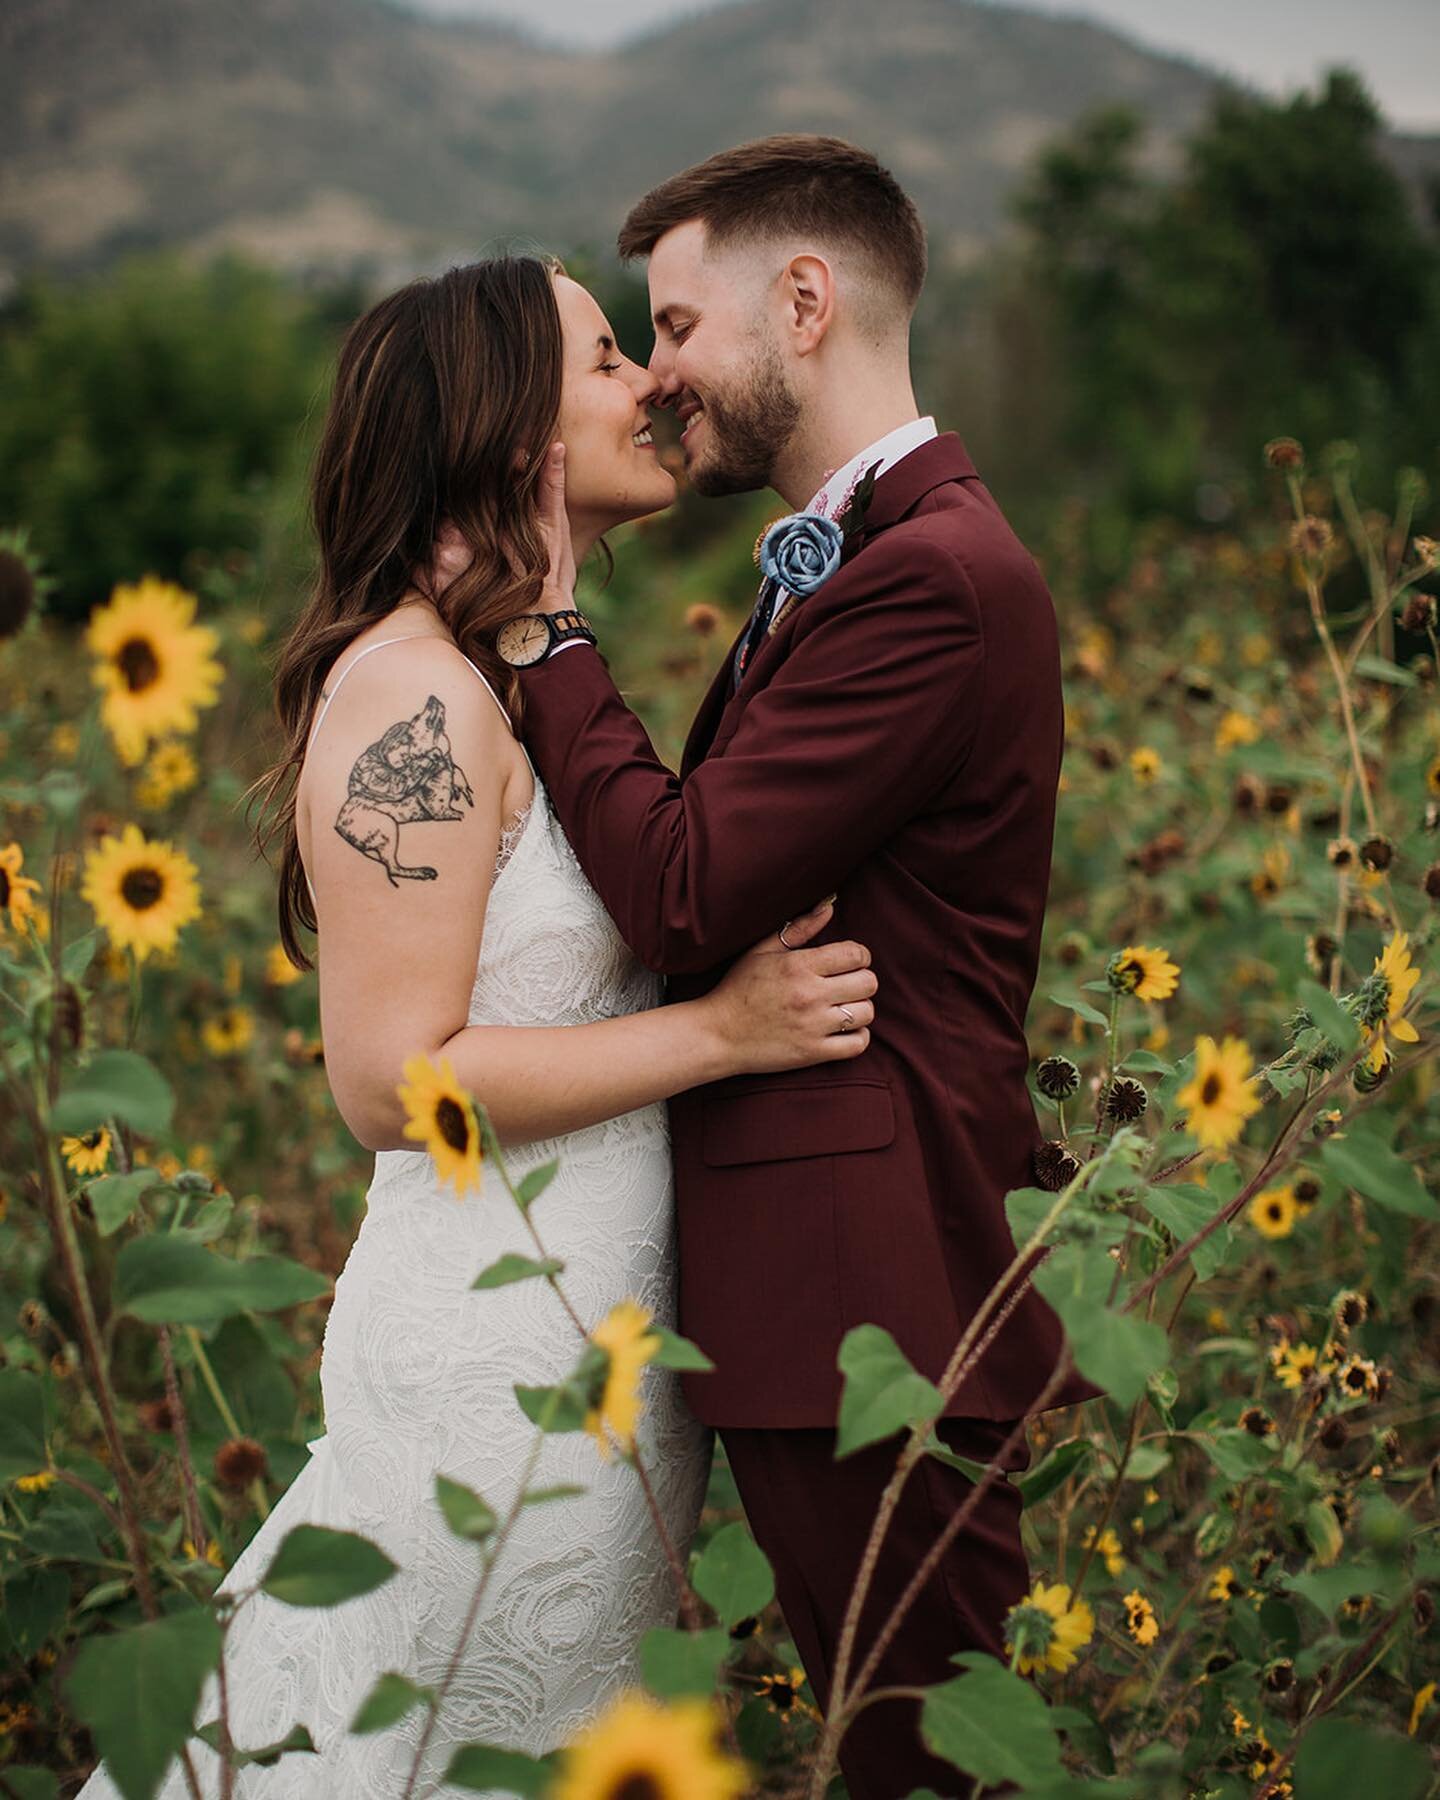 Another epic wedding story that&rsquo;s just too good not to share! This one is about sunflowers and a side of ink&hellip; yup, you heard that right 🔥🔥